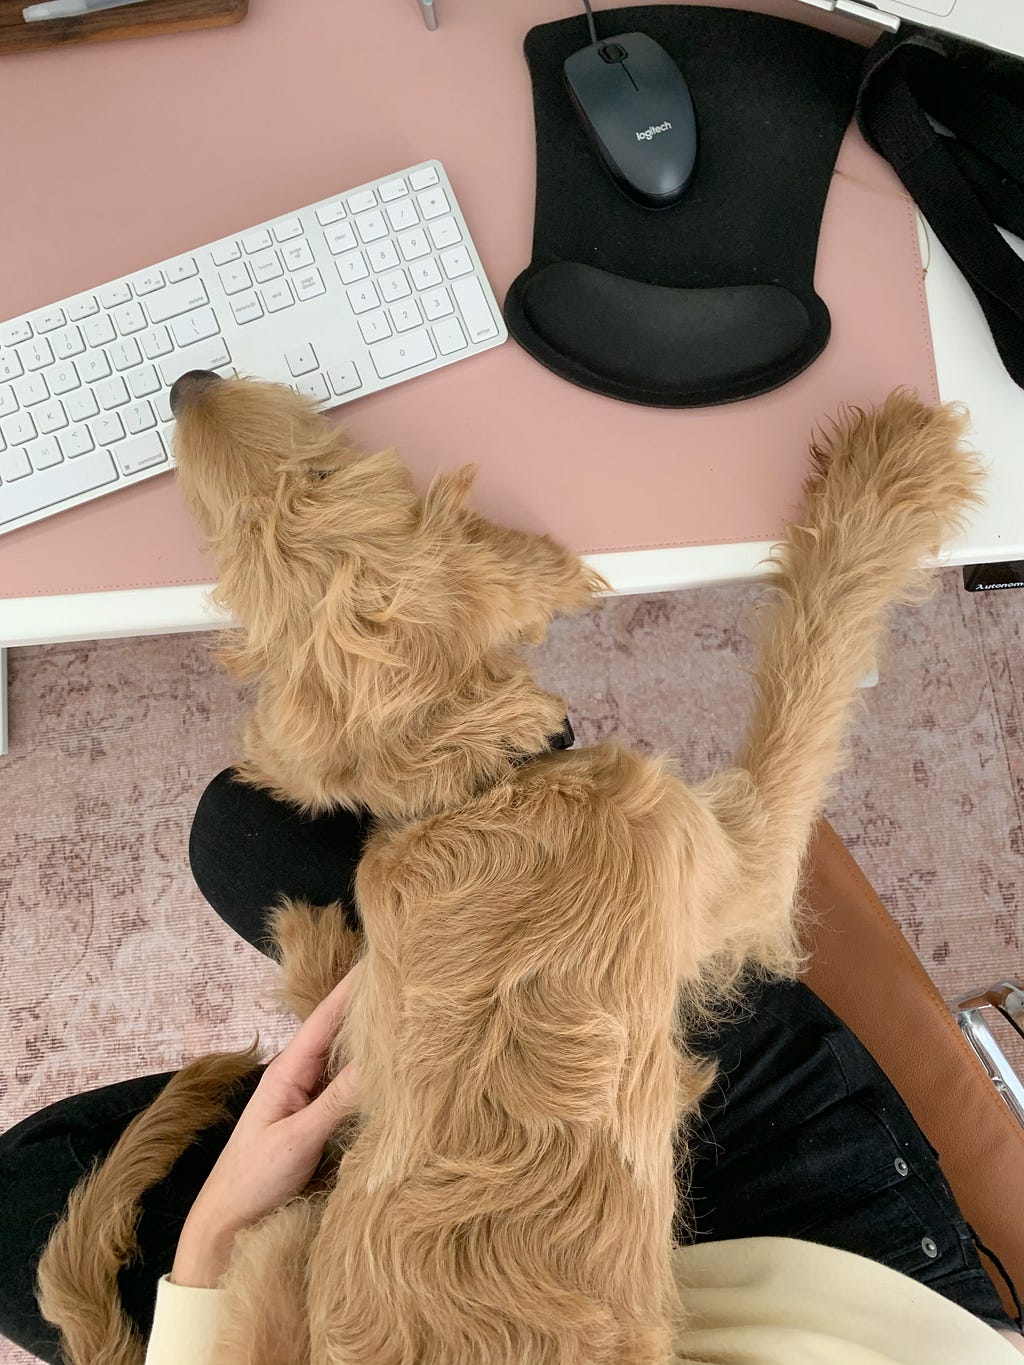 An overhead image of a goldendoodle puppy with heading resting on a desk next to a keyboard.